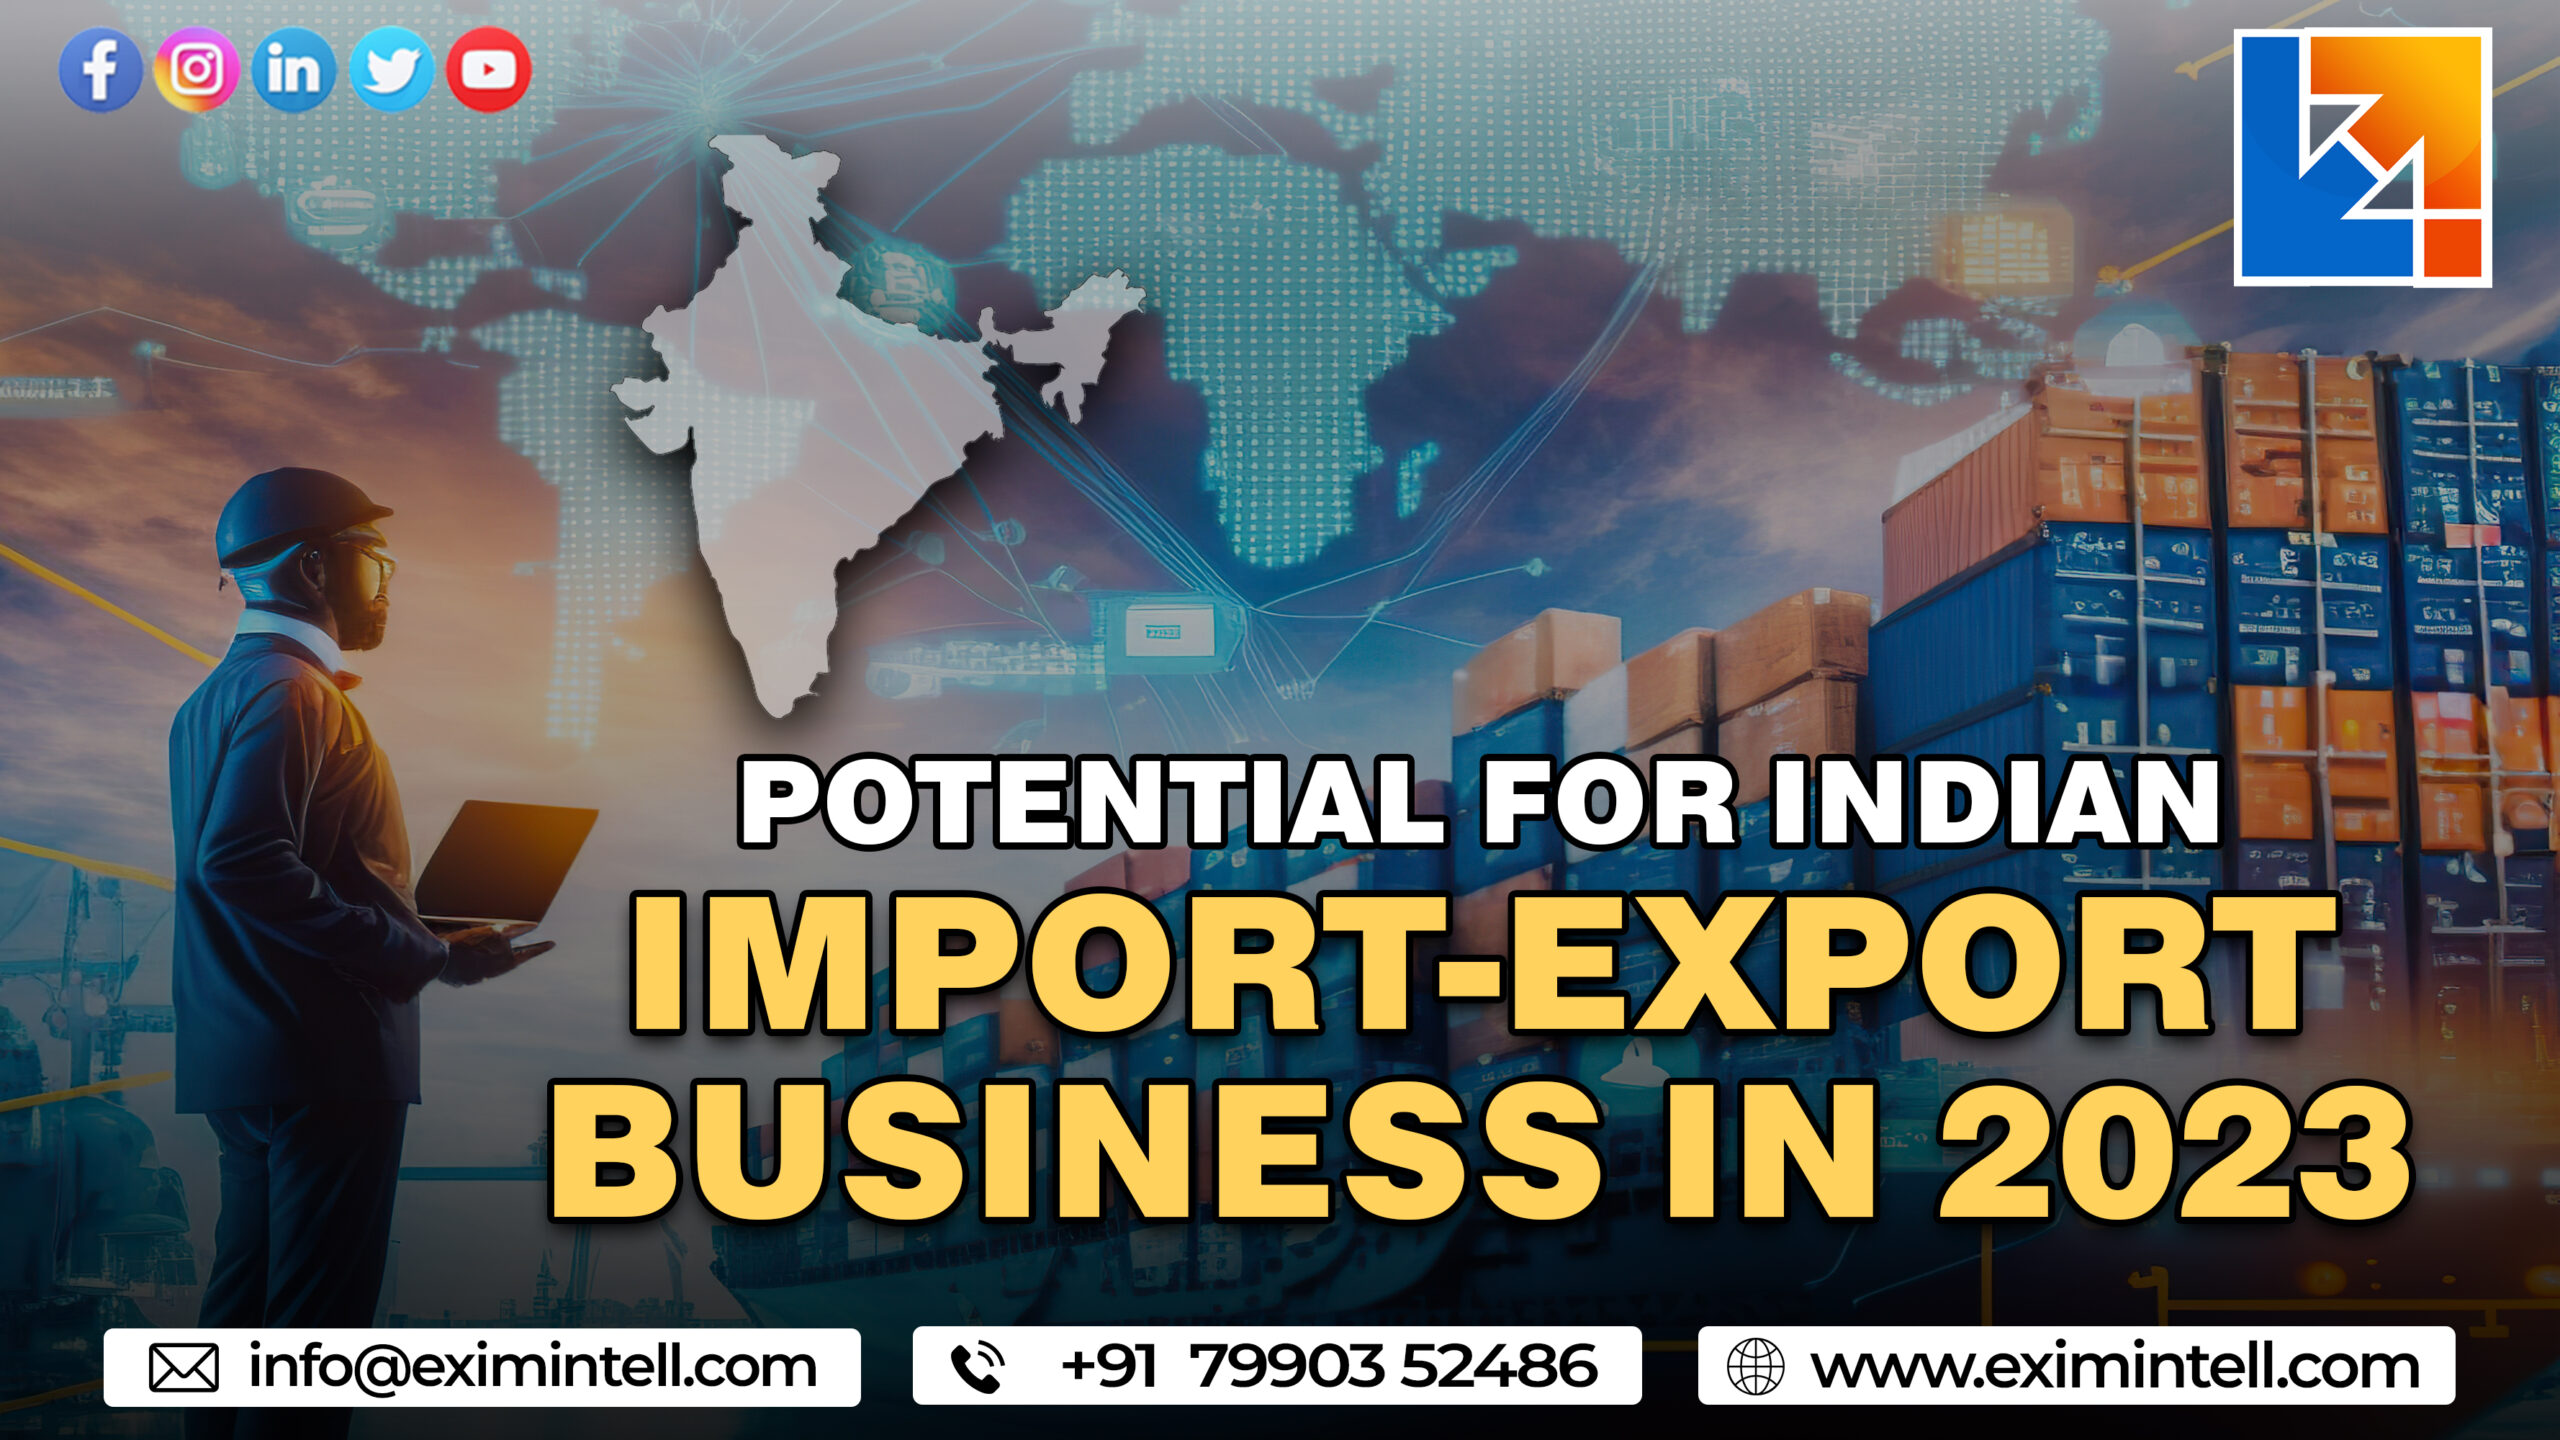 Potential for Indian import-export business in 2023